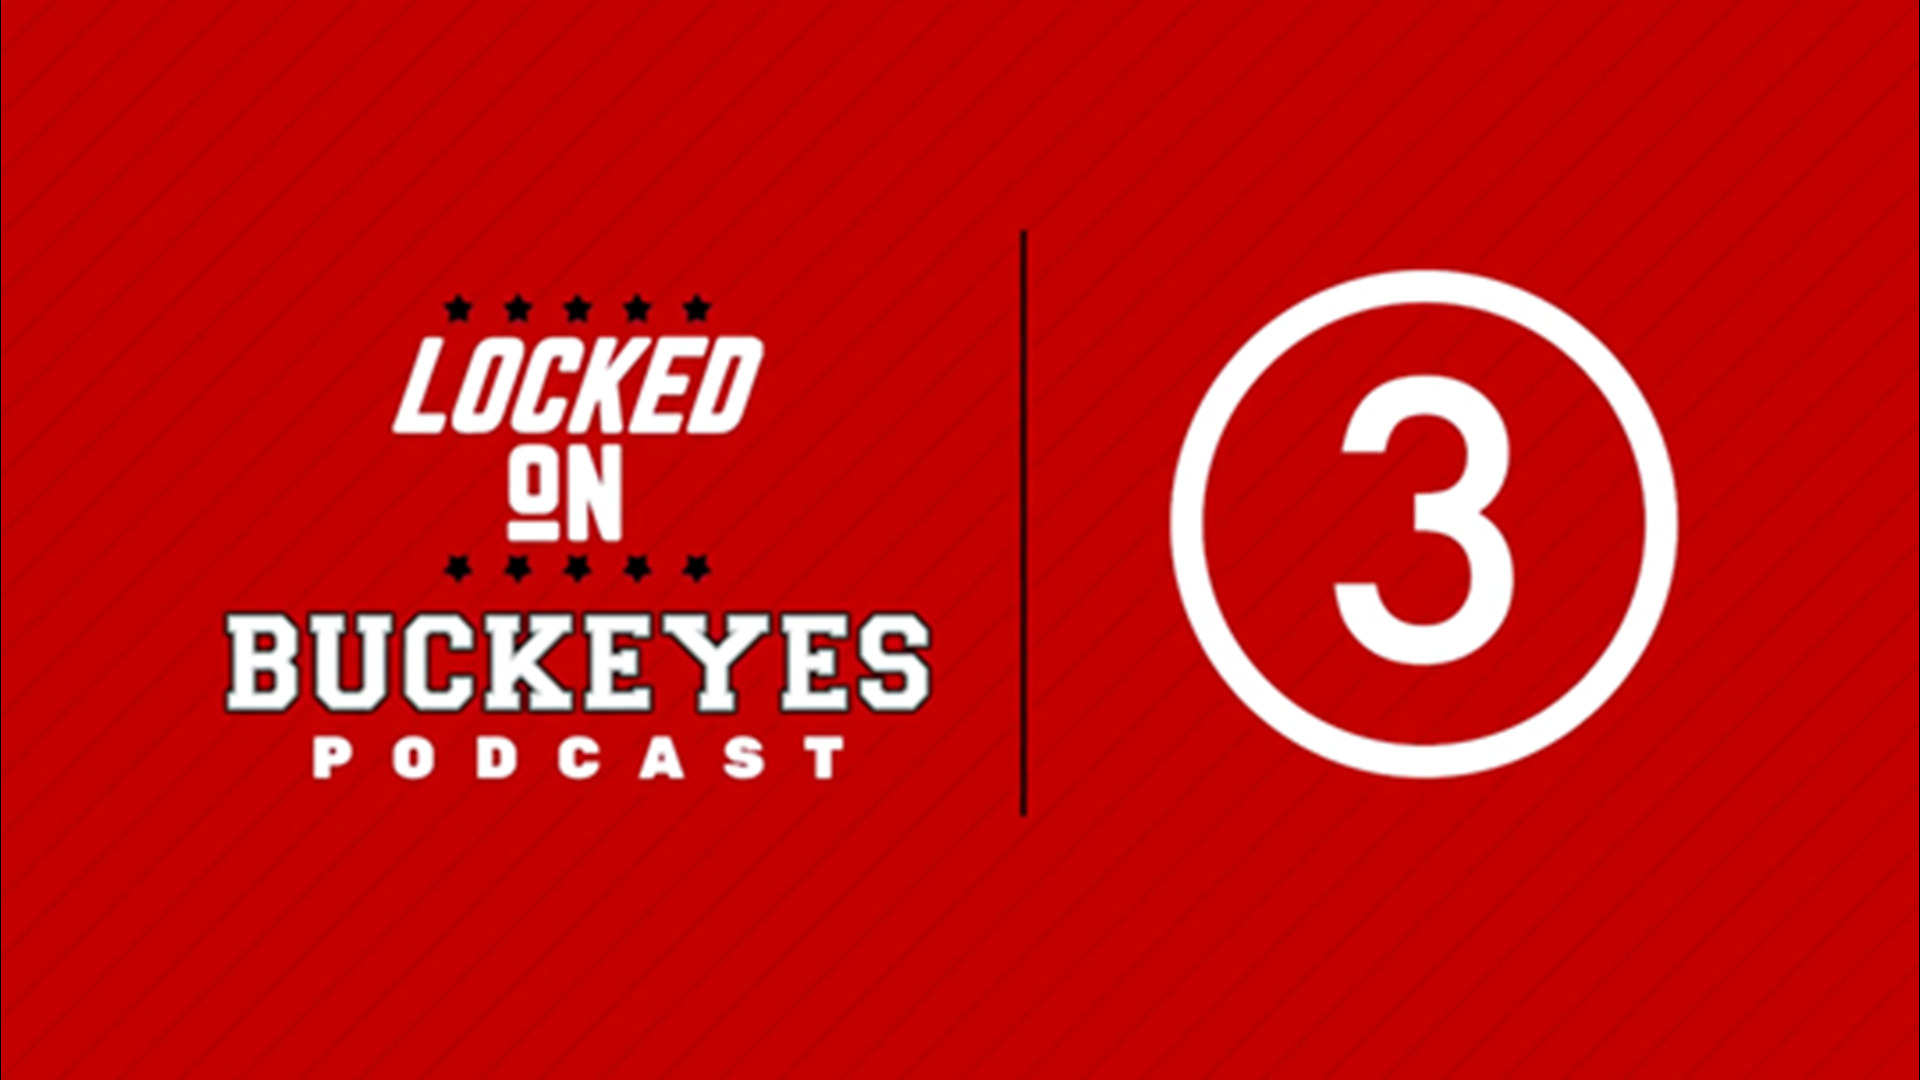 Jay Stephens is joined by Trevor Sikkema of The Draft Network for an early look at the 2022 NFL Draft.